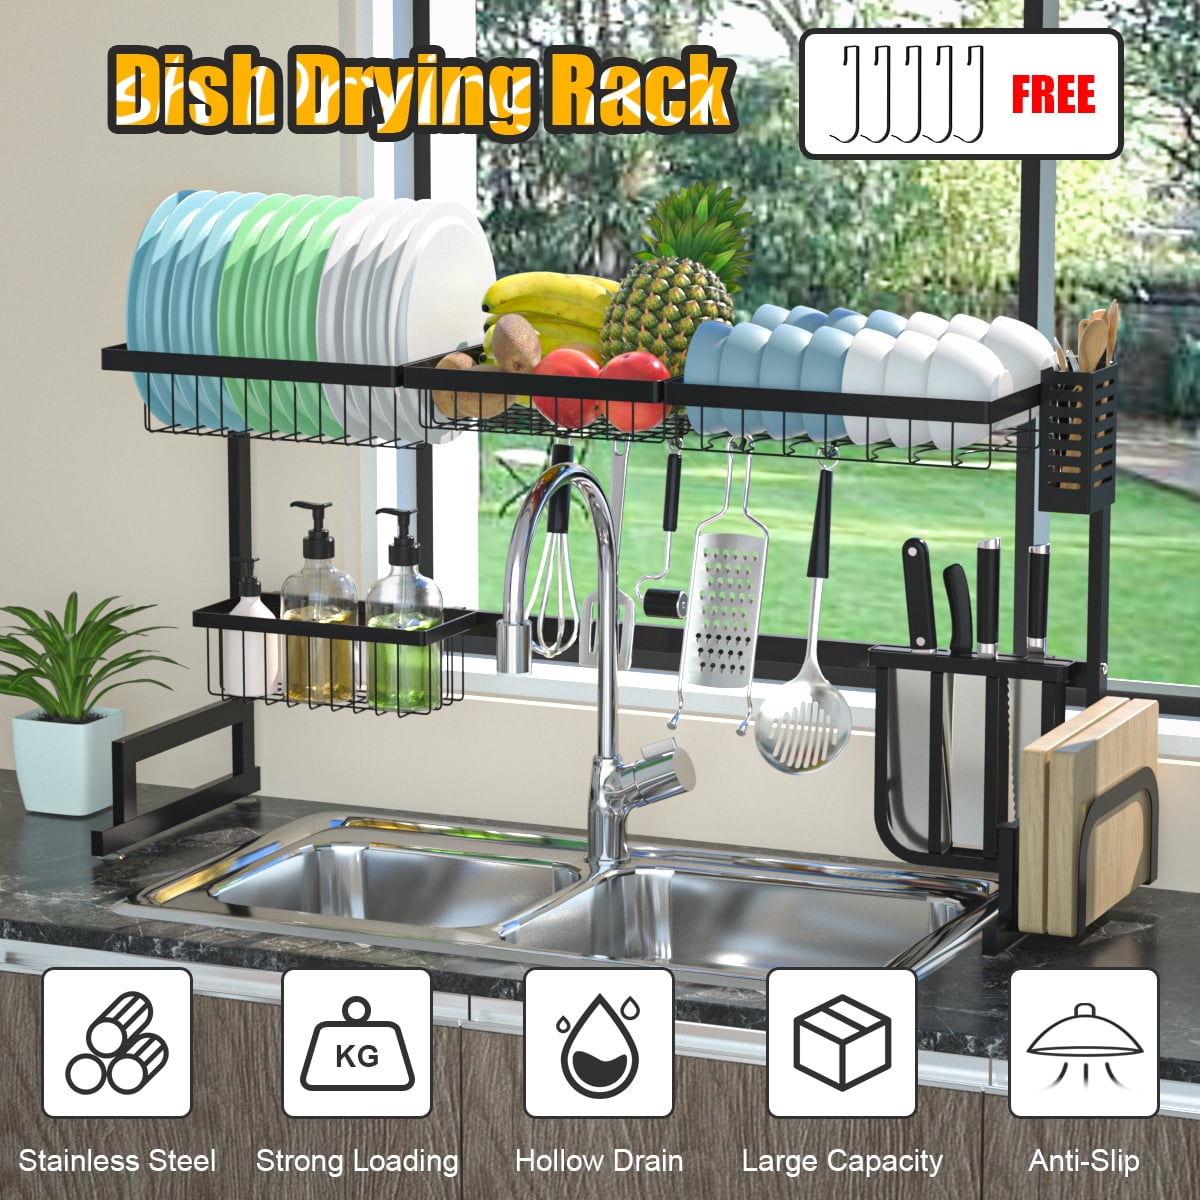 Teraves Over Sink Dish Drying Rack Large Two Tier Vertical